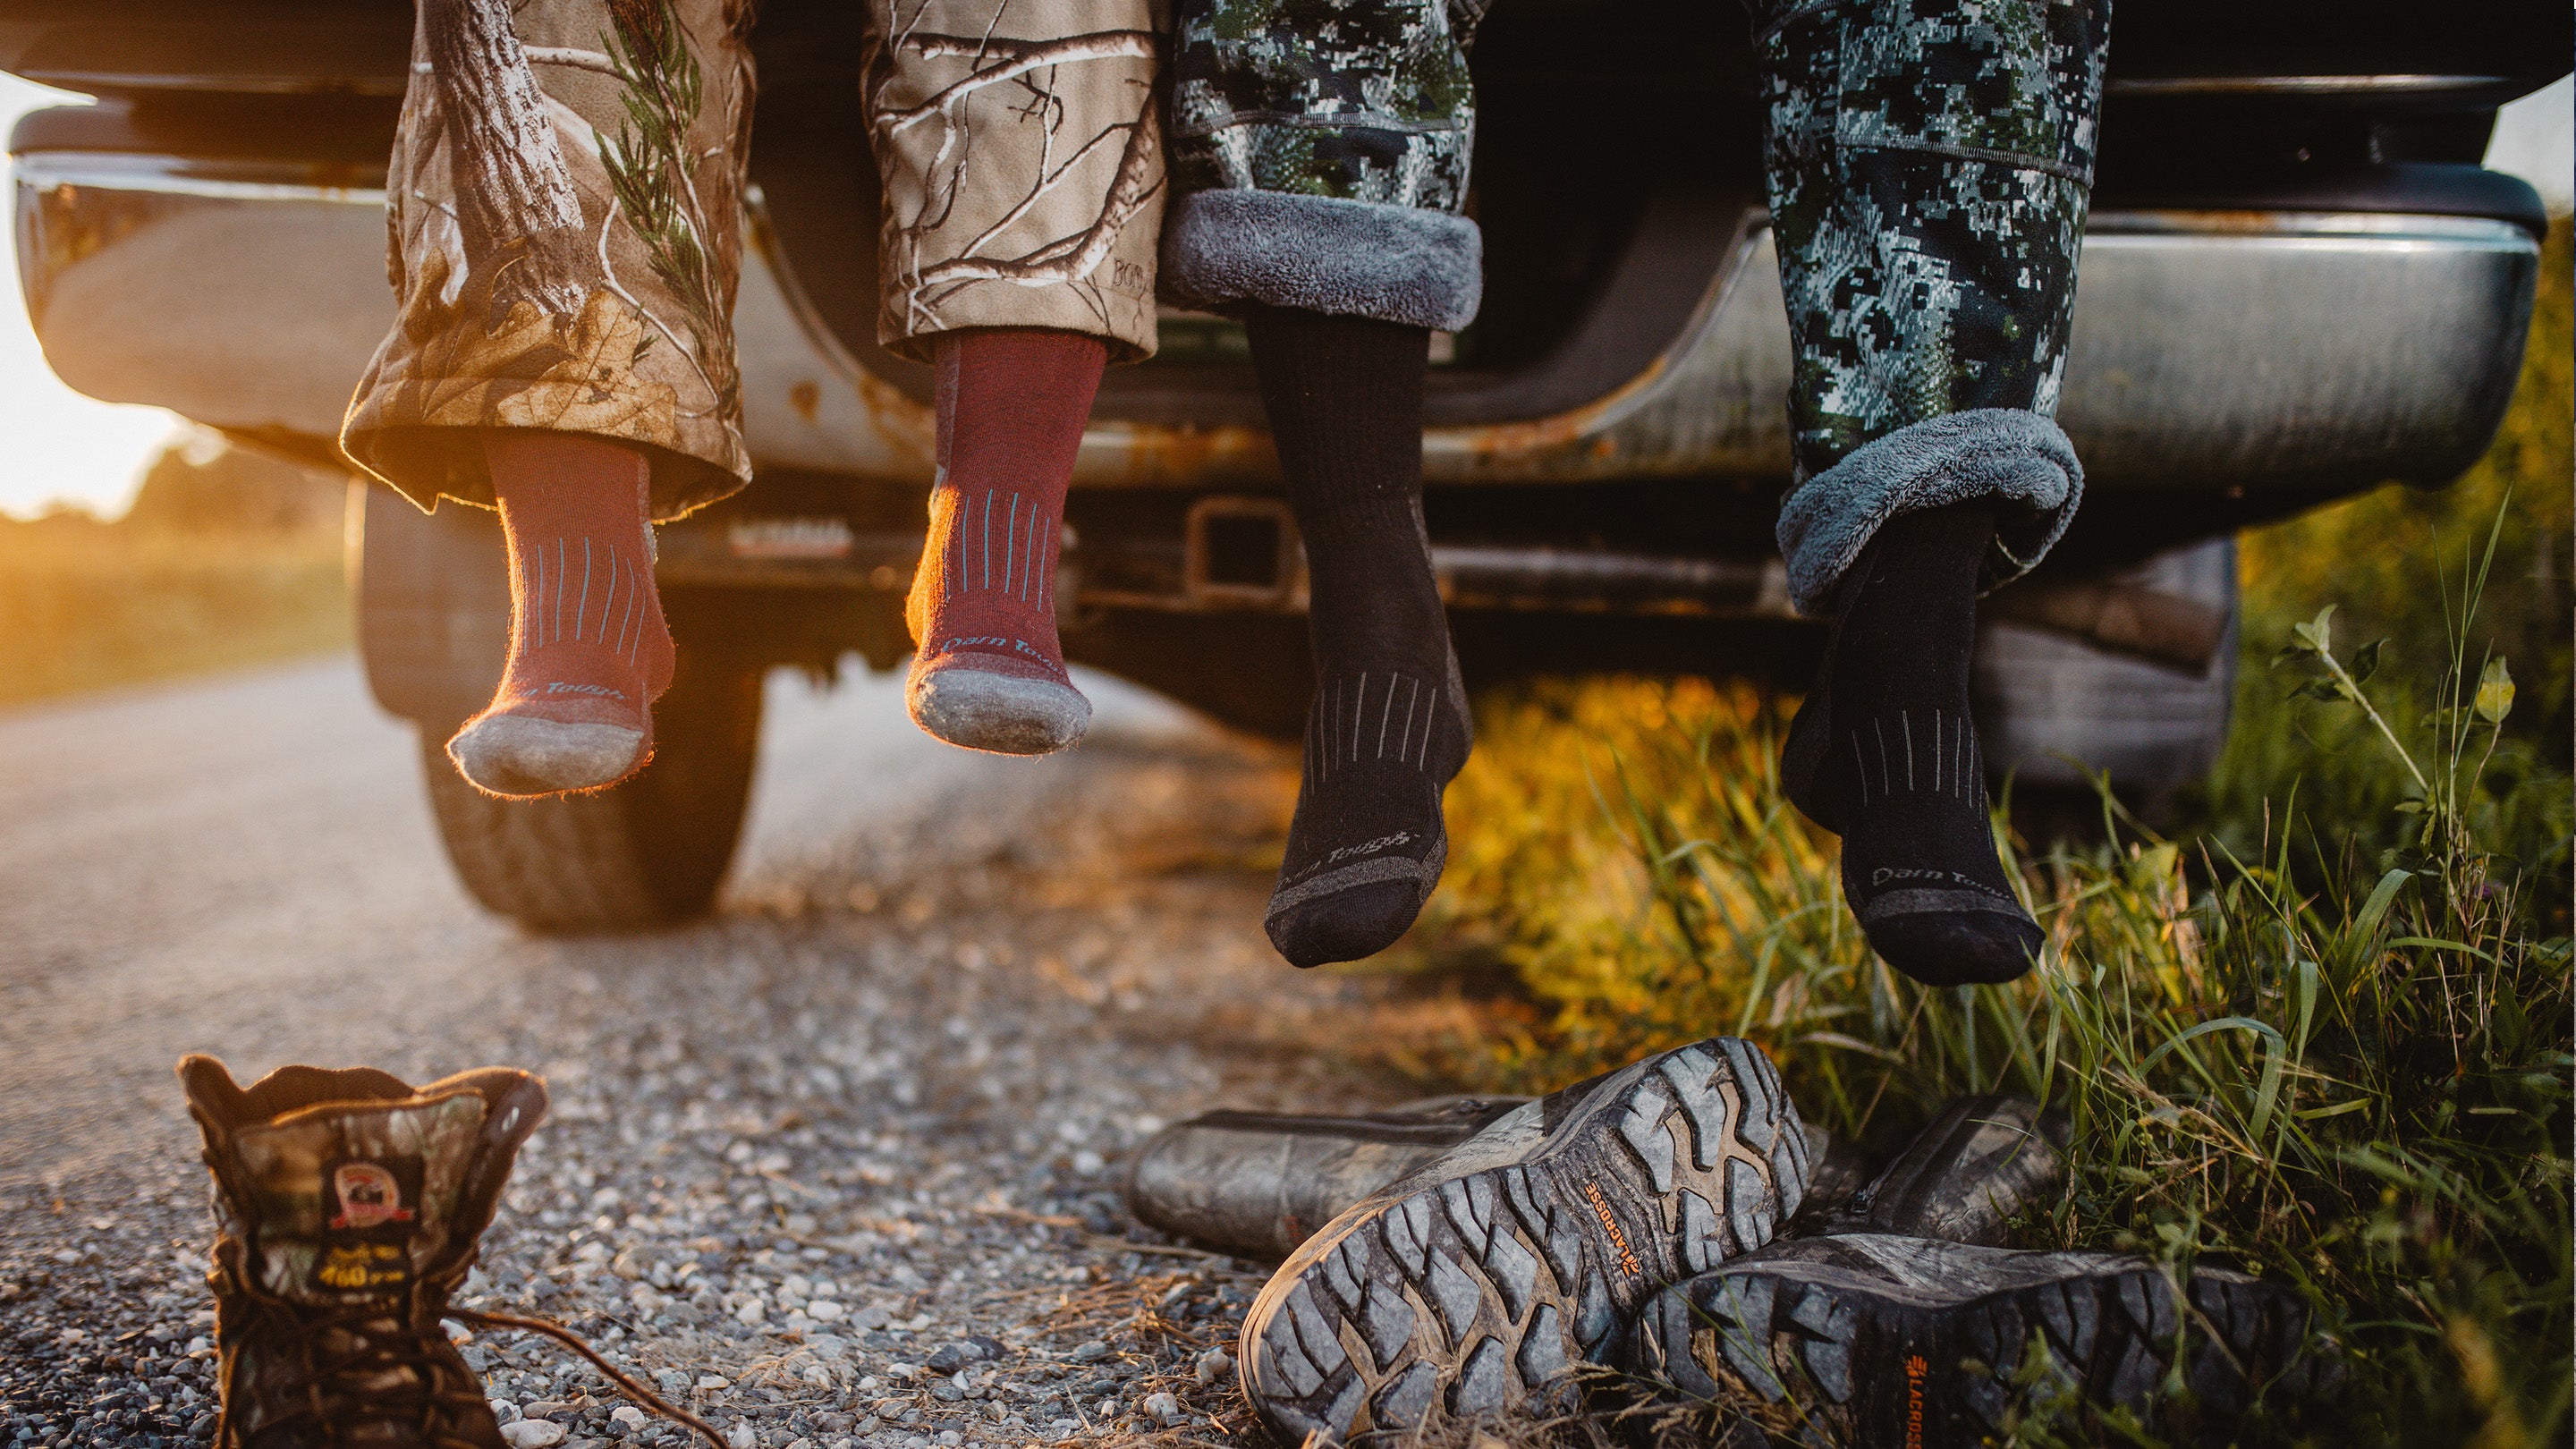 Man and woman in camo wearing darn tough hunting socks about to put hunter boots on